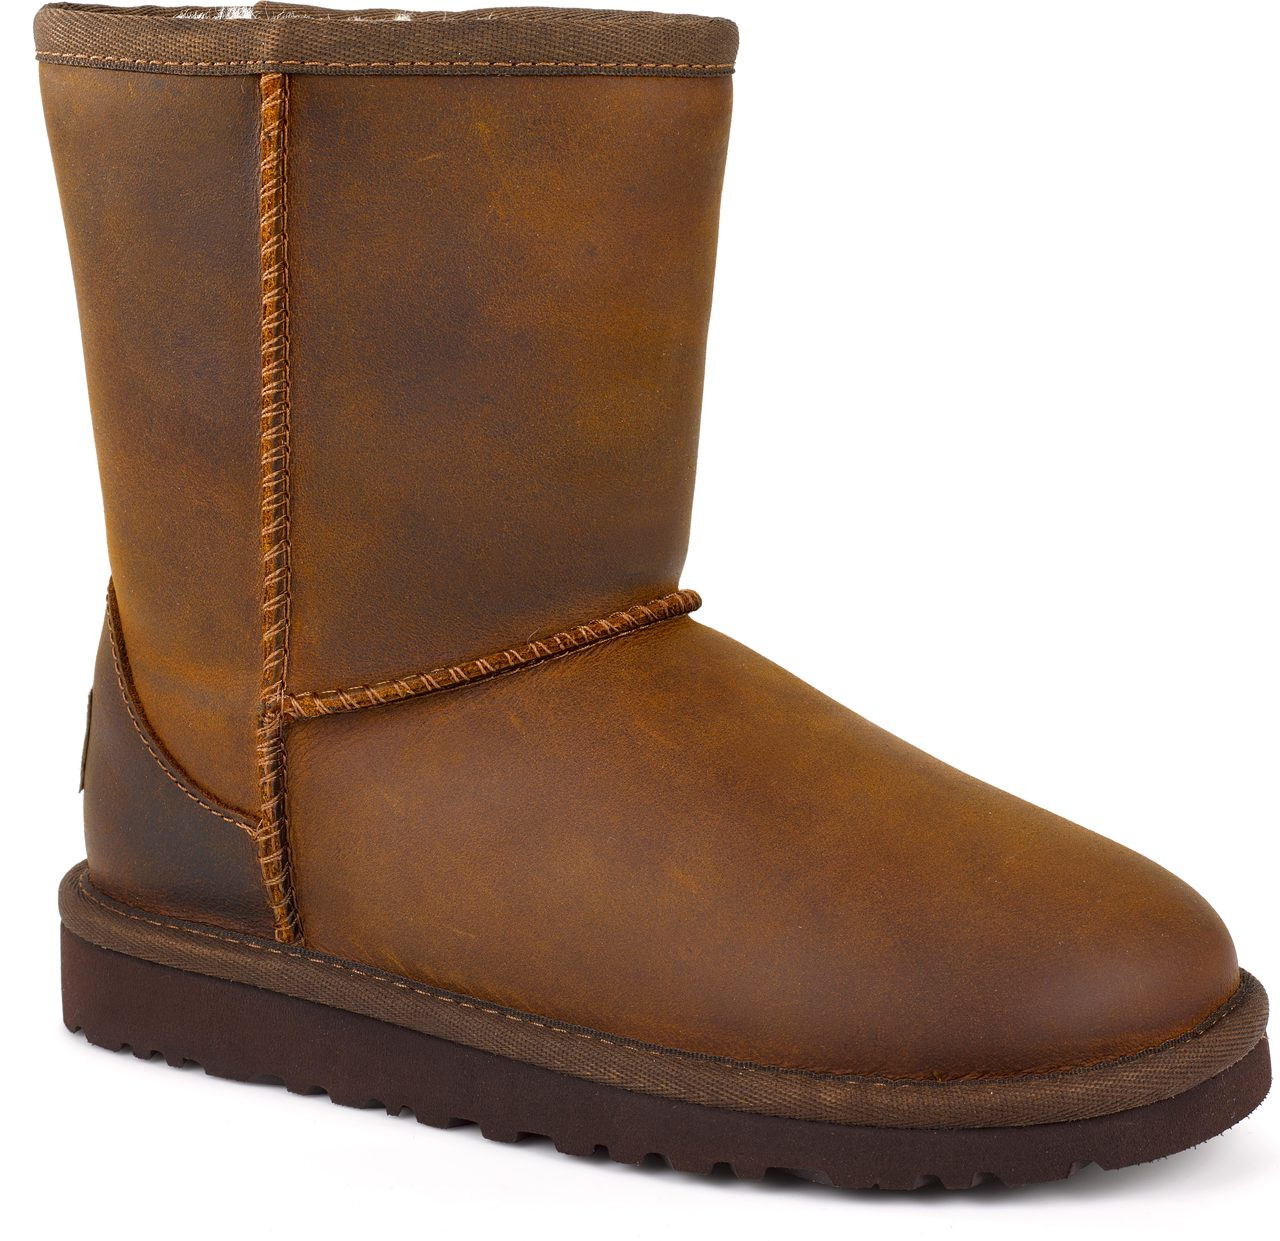 classic short leather uggs